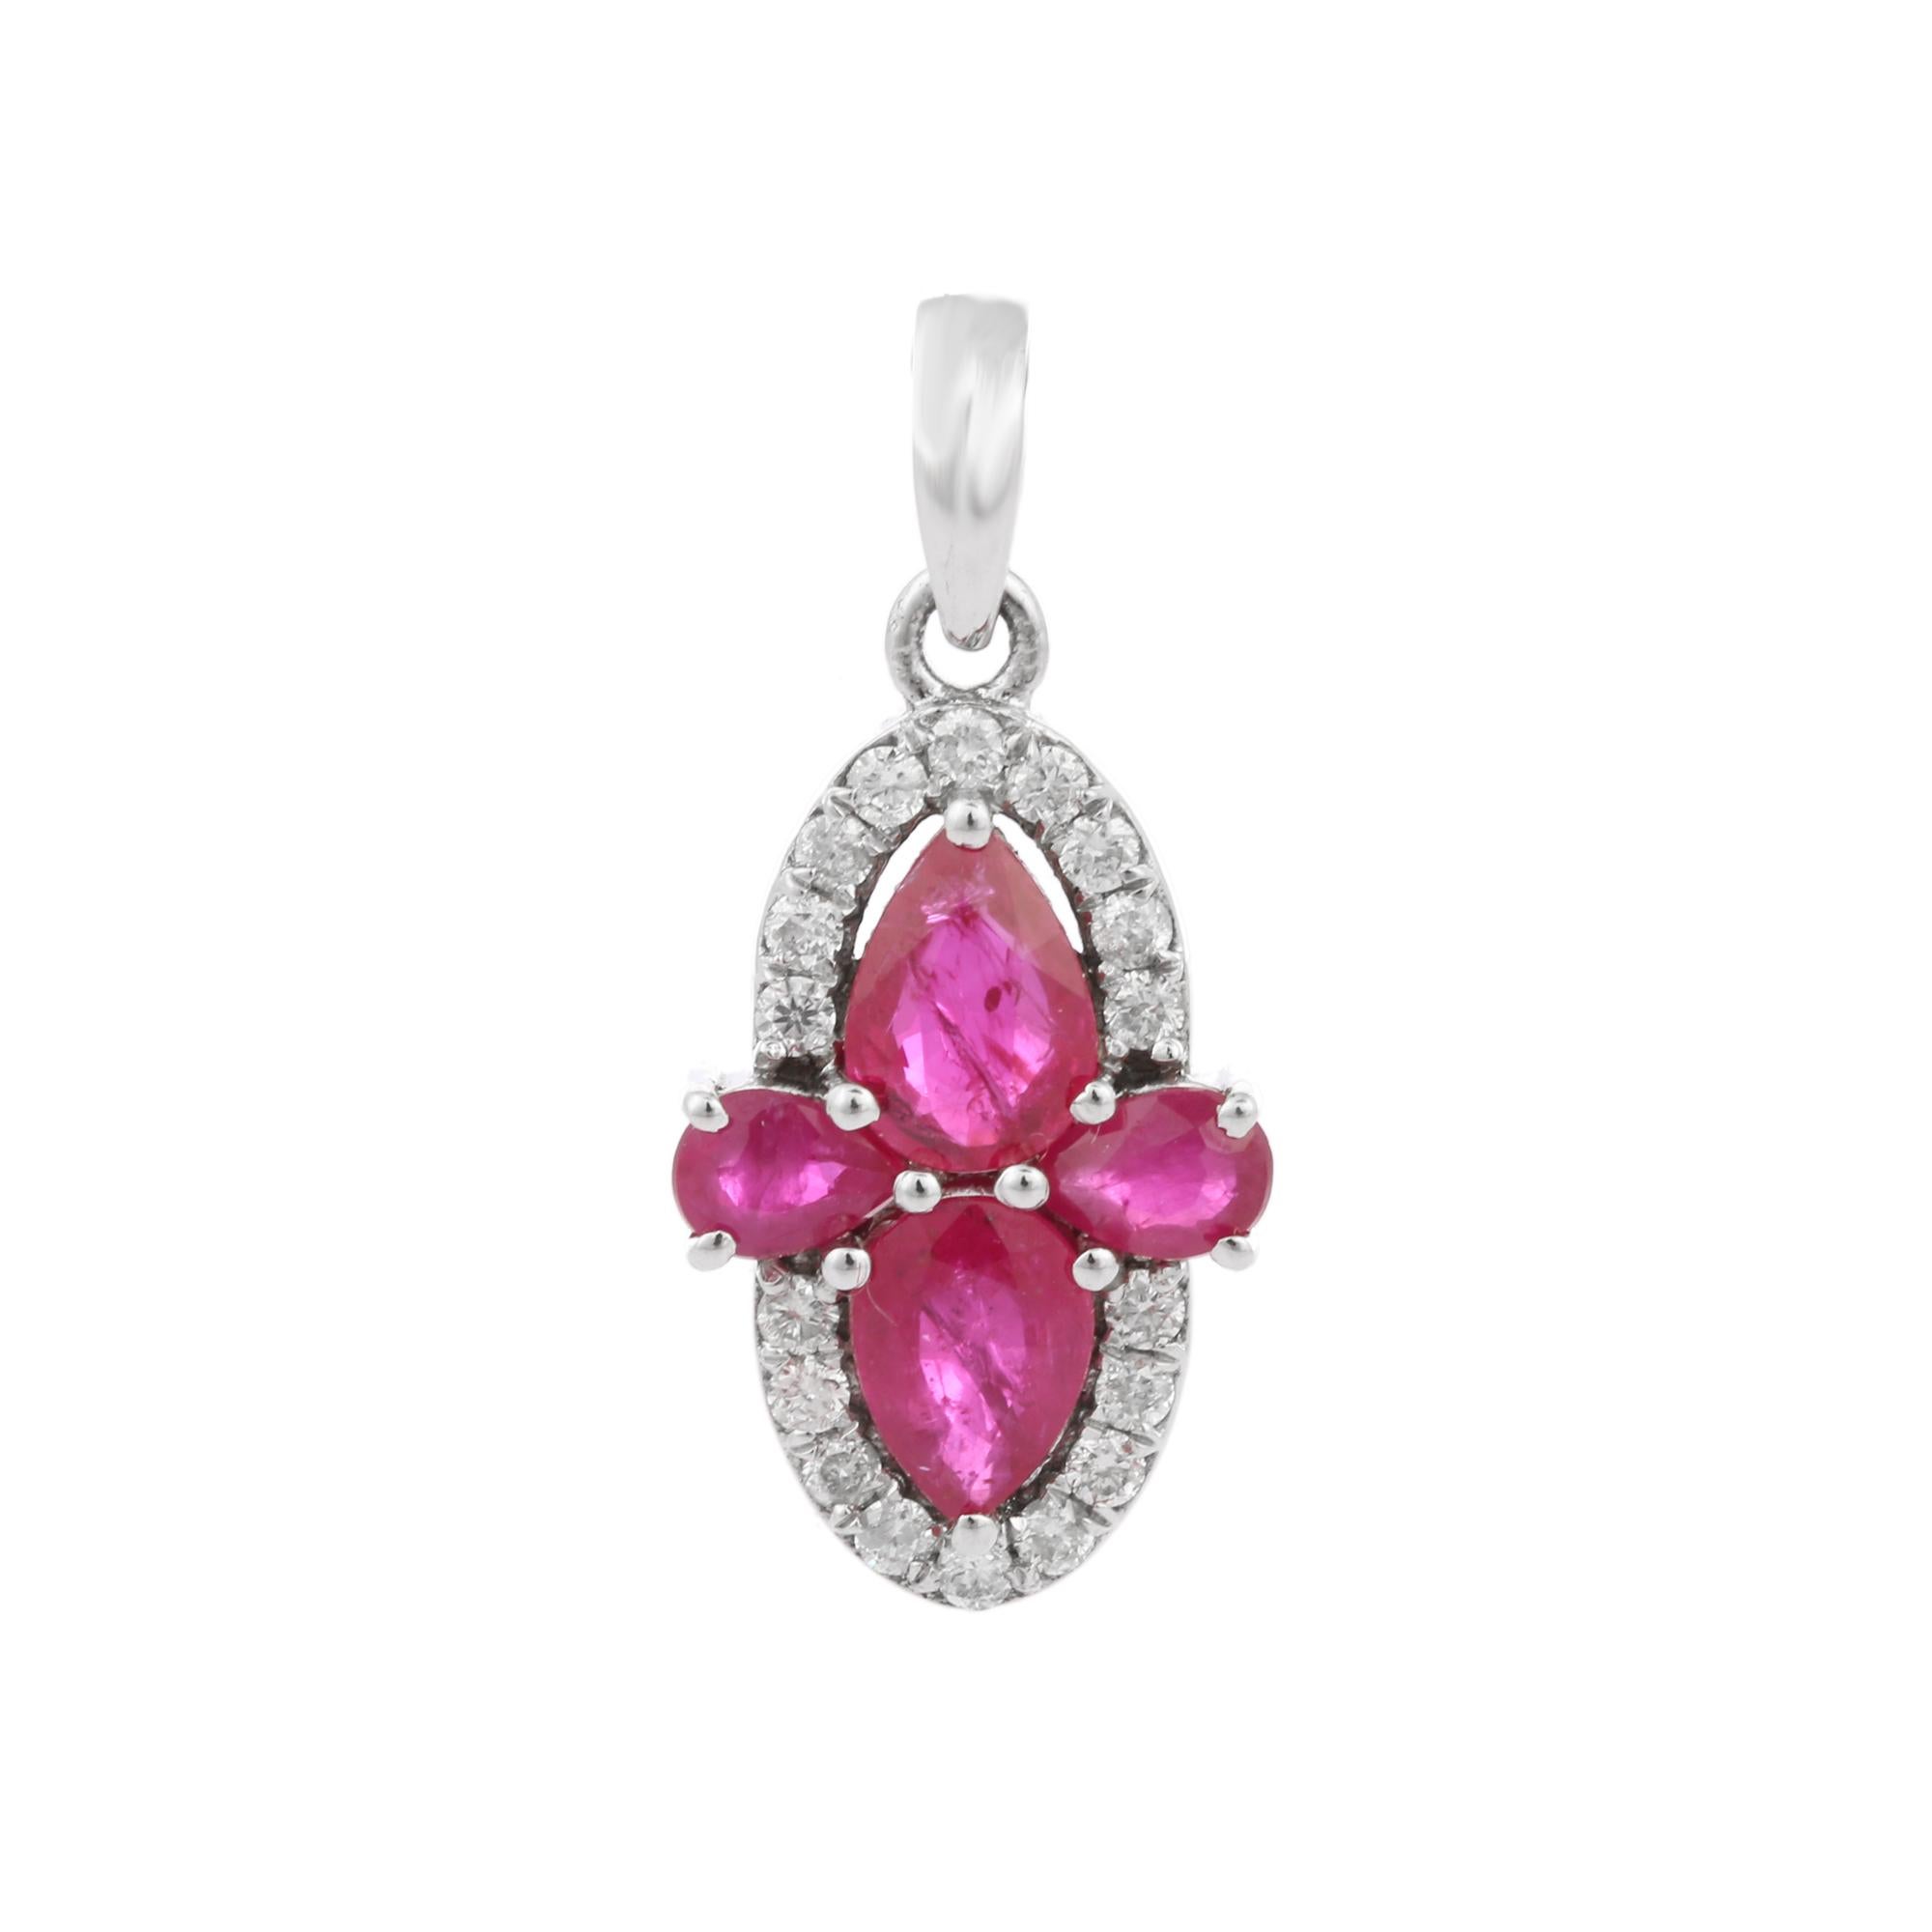 Exclusive ruby and diamond pendant in 14K Gold. It has a pear cut ruby with diamonds that completes your look with a decent touch. Pendants are used to wear or gifted to represent love and promises. It's an attractive jewelry piece that goes with